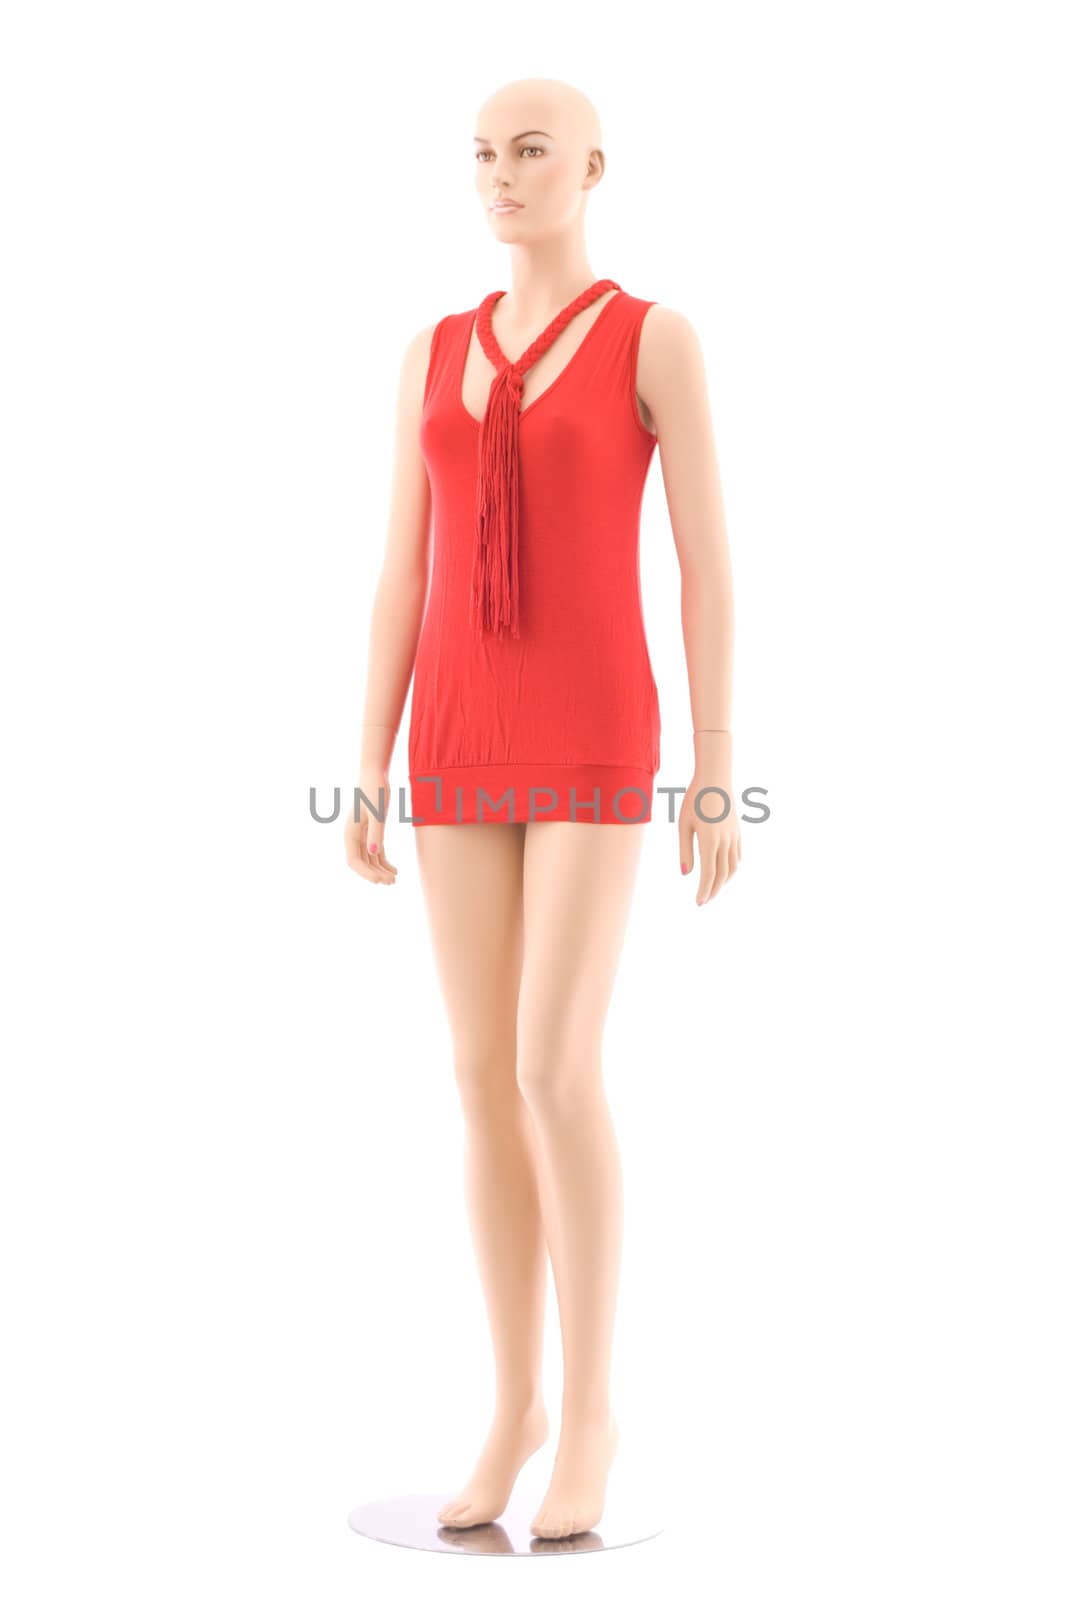 Bald female mannequin in red small clothing. Isolated on white background